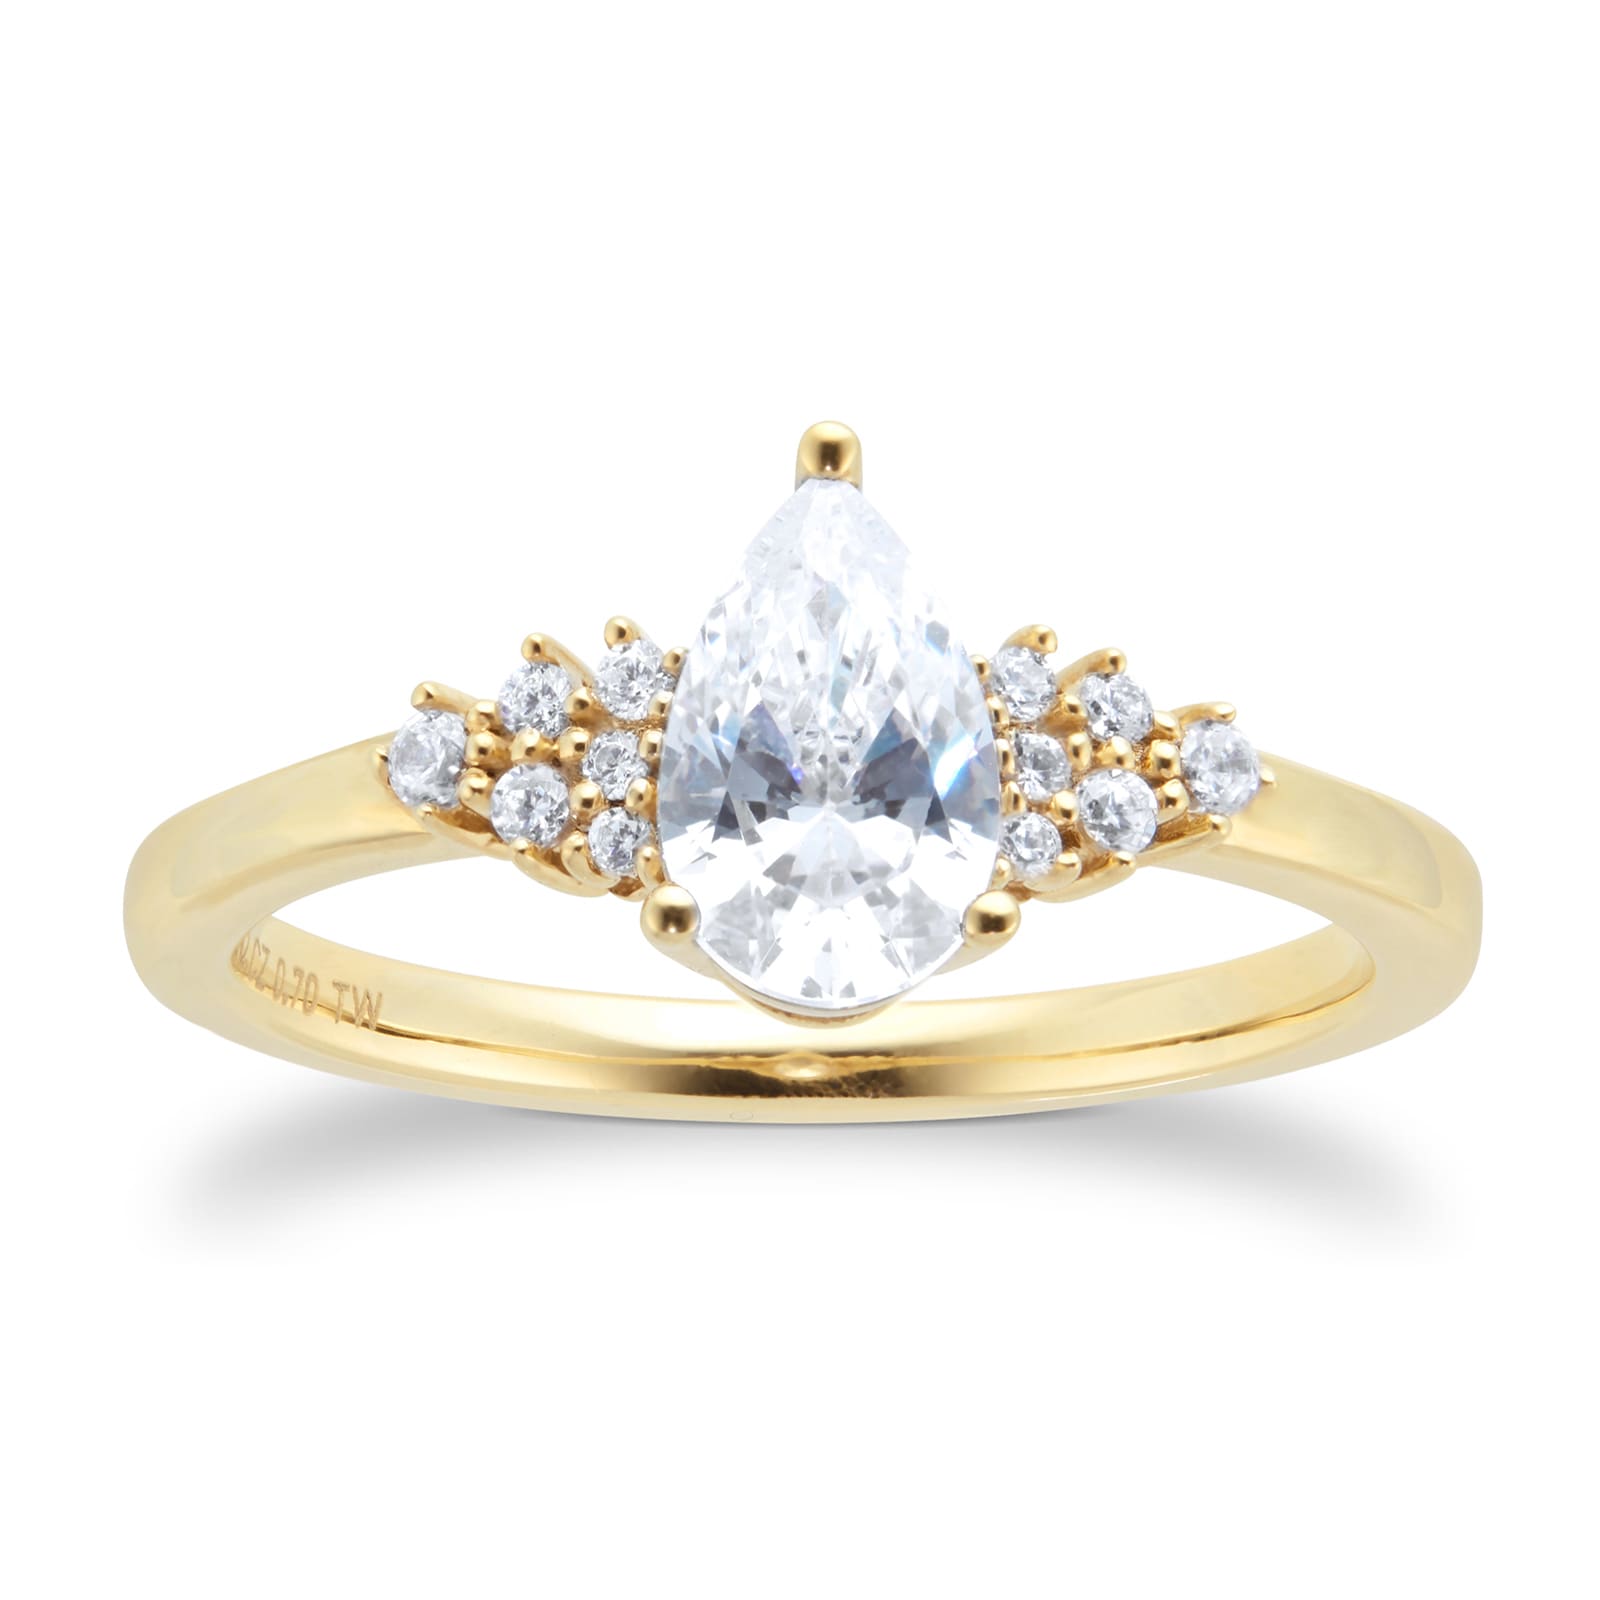 18ct Yellow Gold 0.70cttw Diamond Pear Engagement Ring - Ring Size O